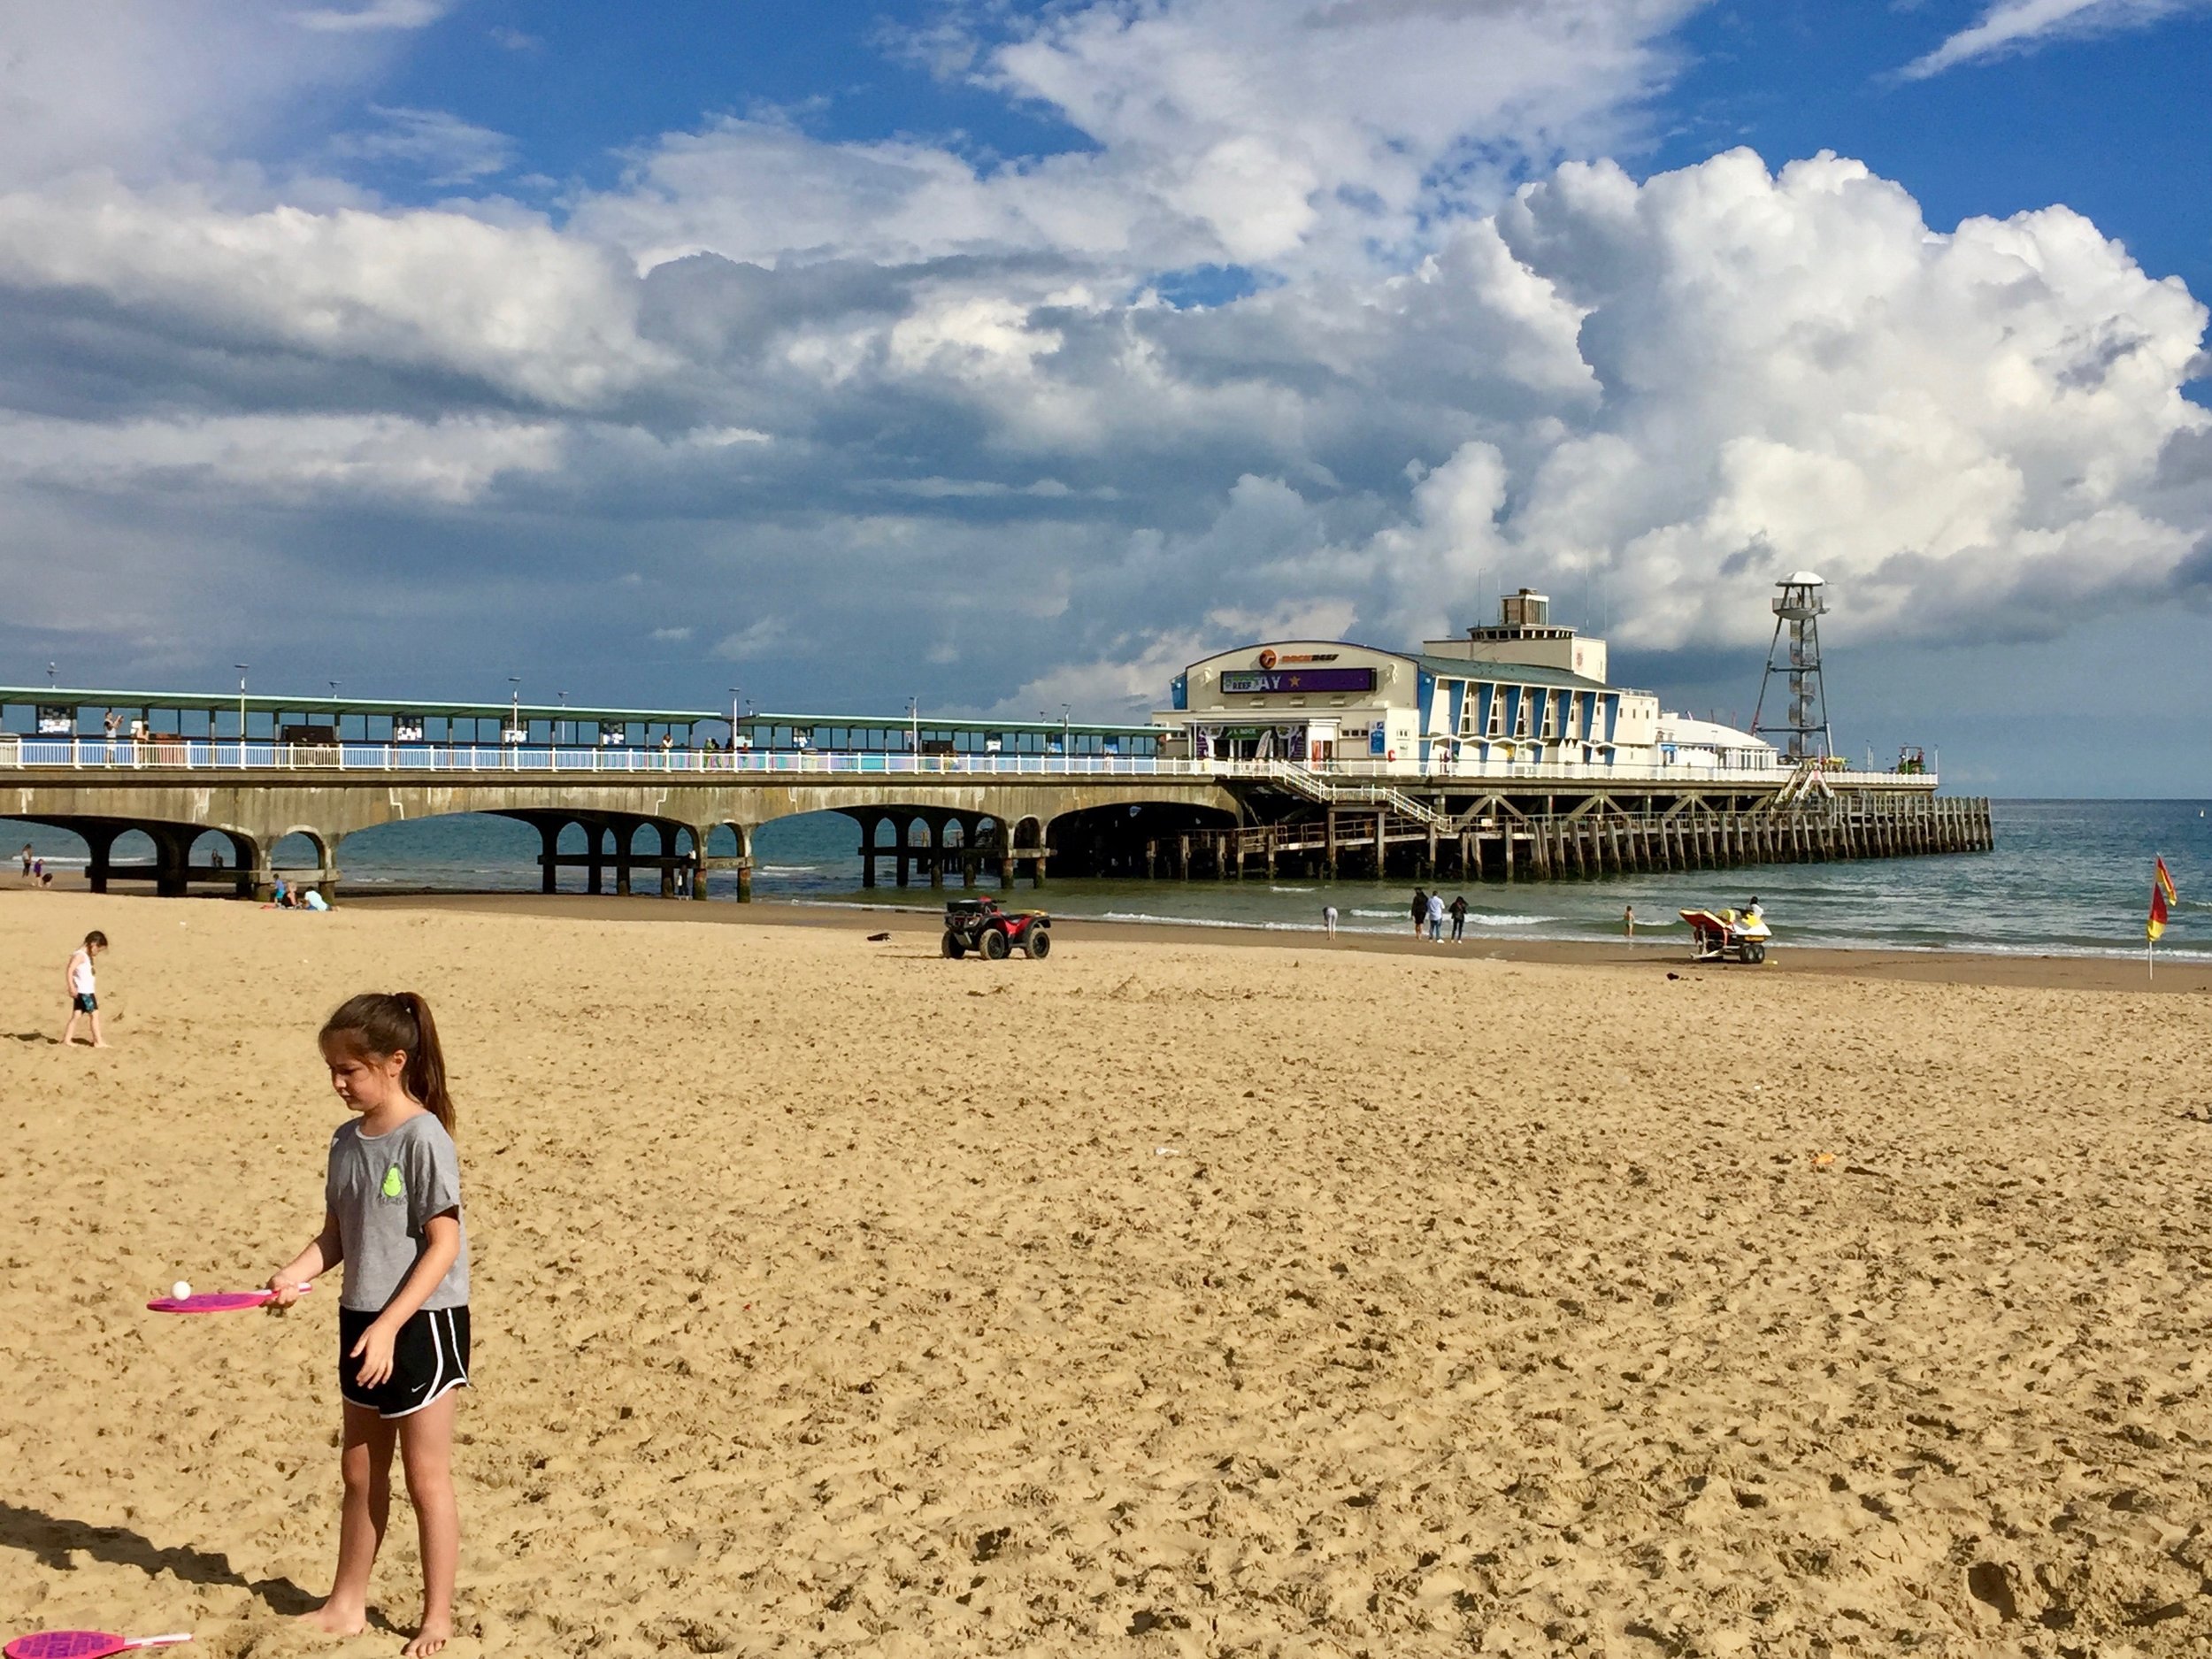 The clouds are moving in over Bournemouth Pier.